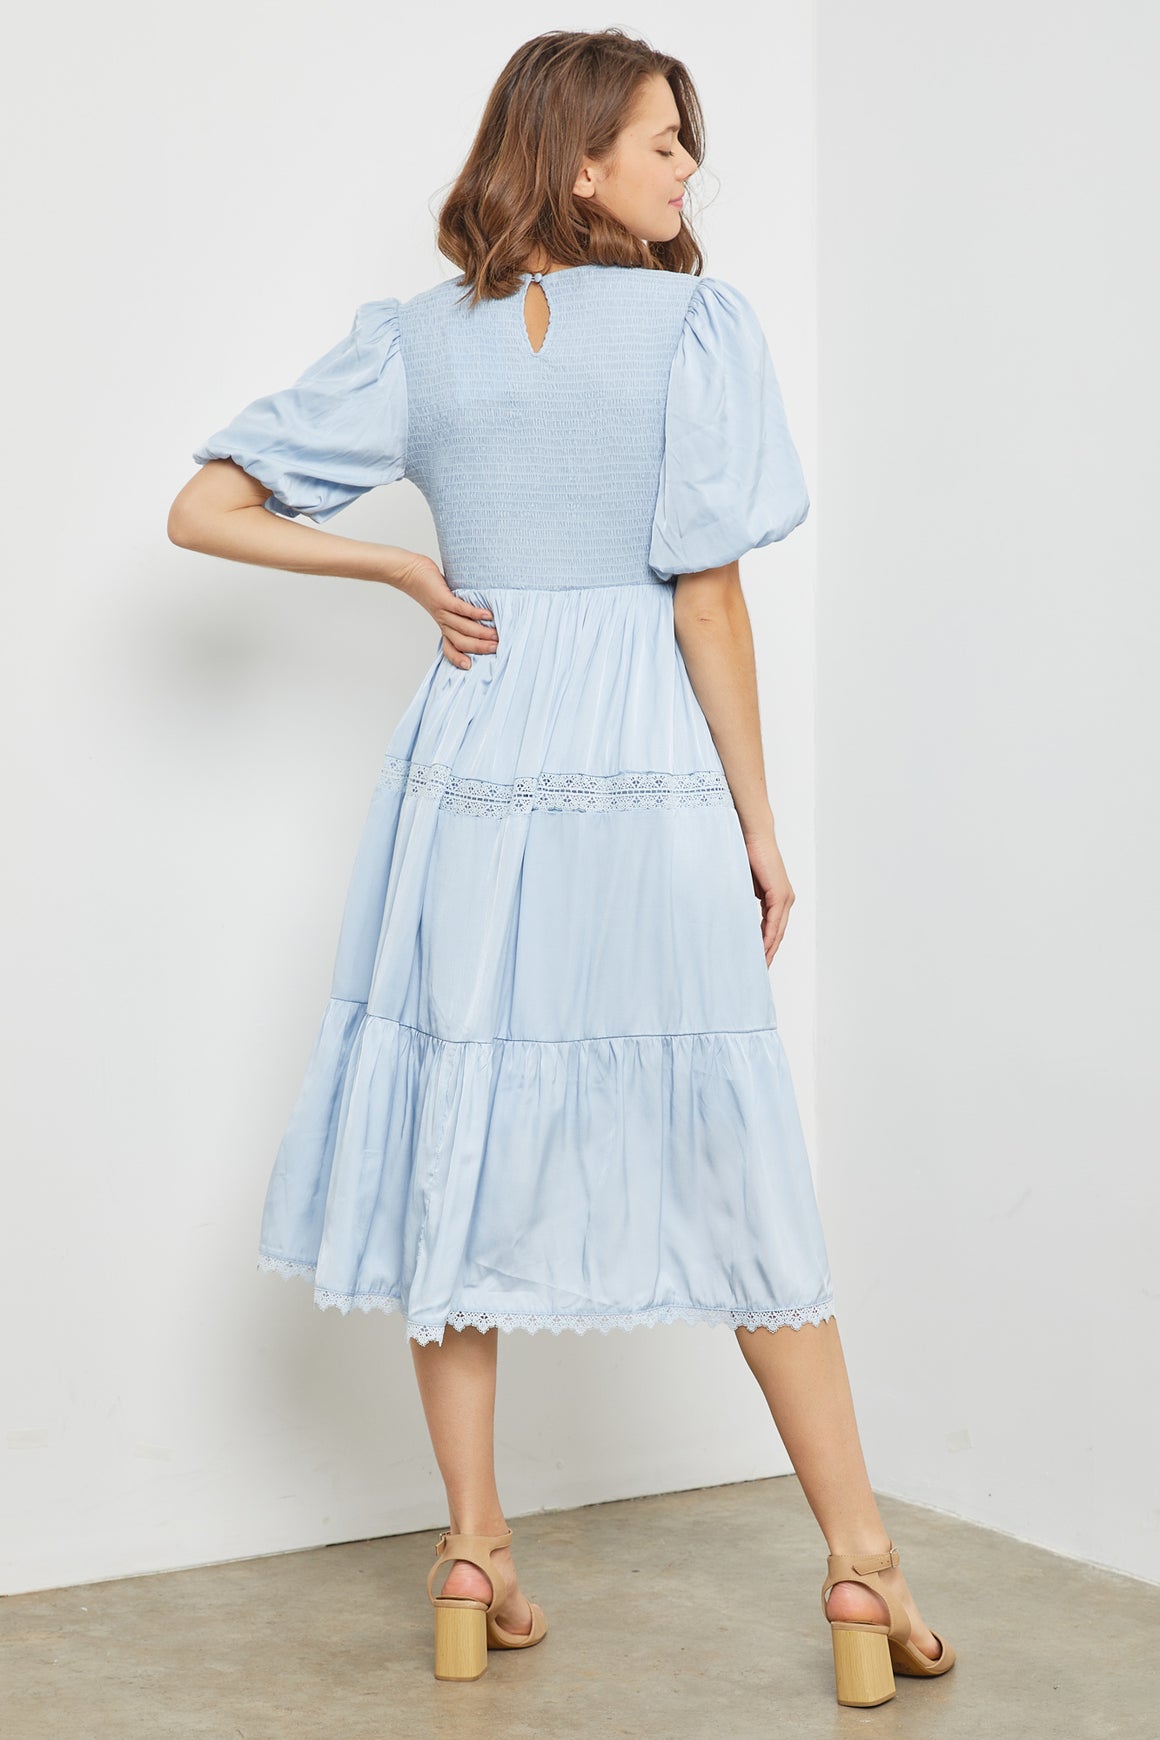 Dress | Cotton Tiered Smocked